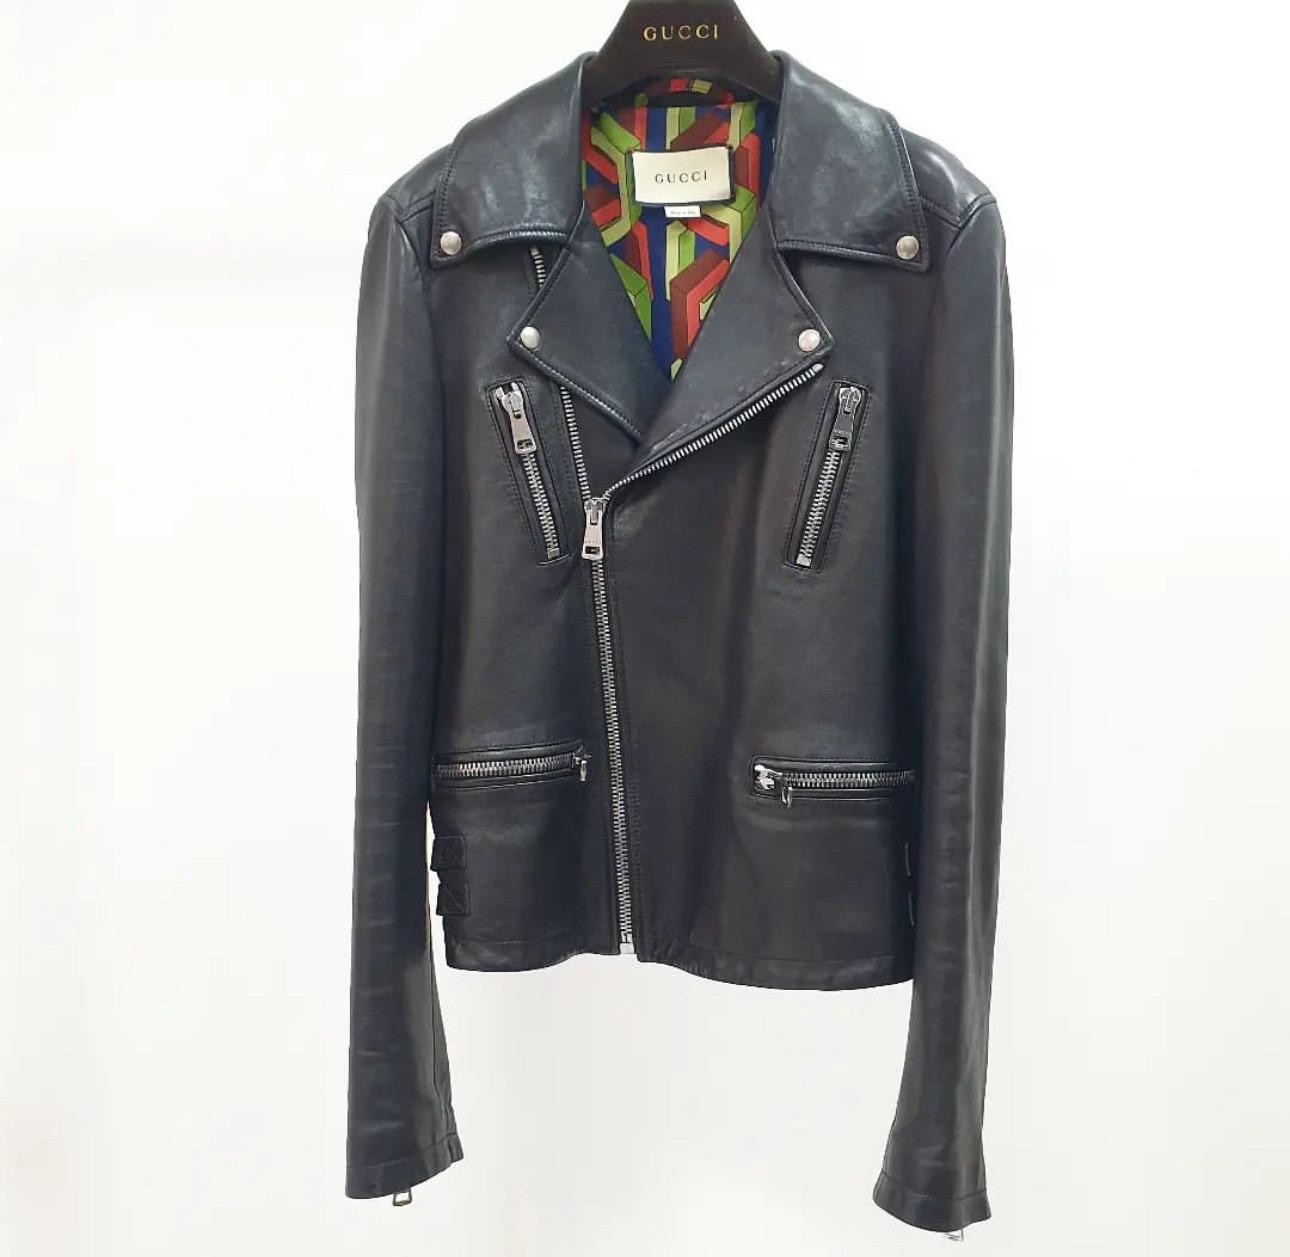 GUCCI Black Embroidered Crystal Tiger Bomber Leather Jacket In Good Condition For Sale In Krakow, PL